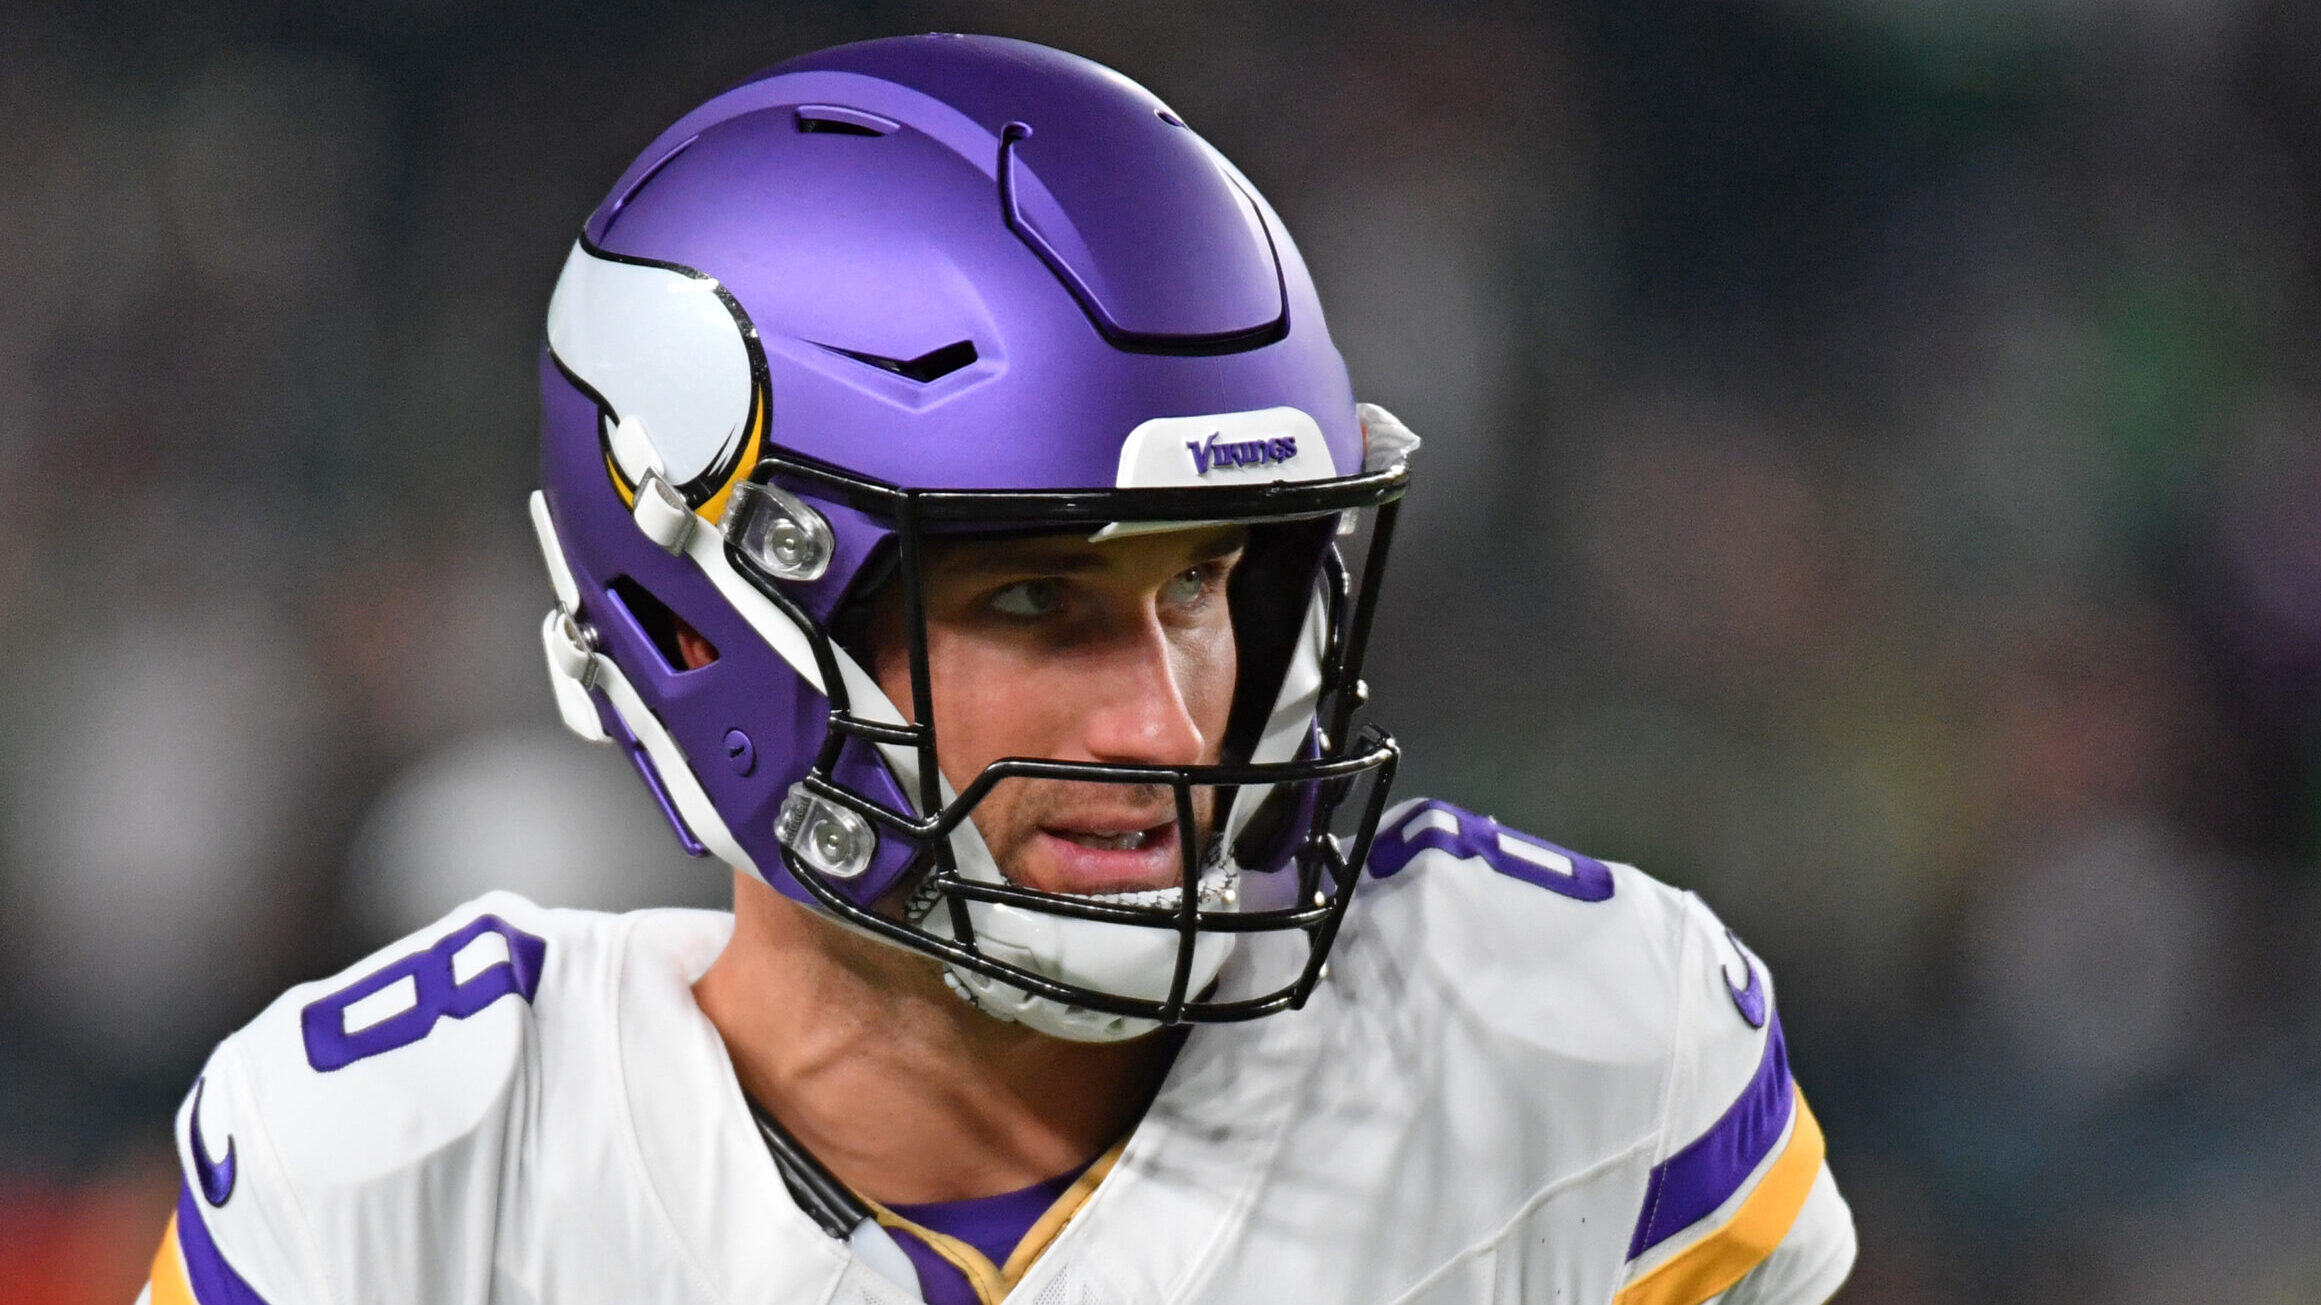 Vikings QB Kirk Cousins looks to his left with his helmet on